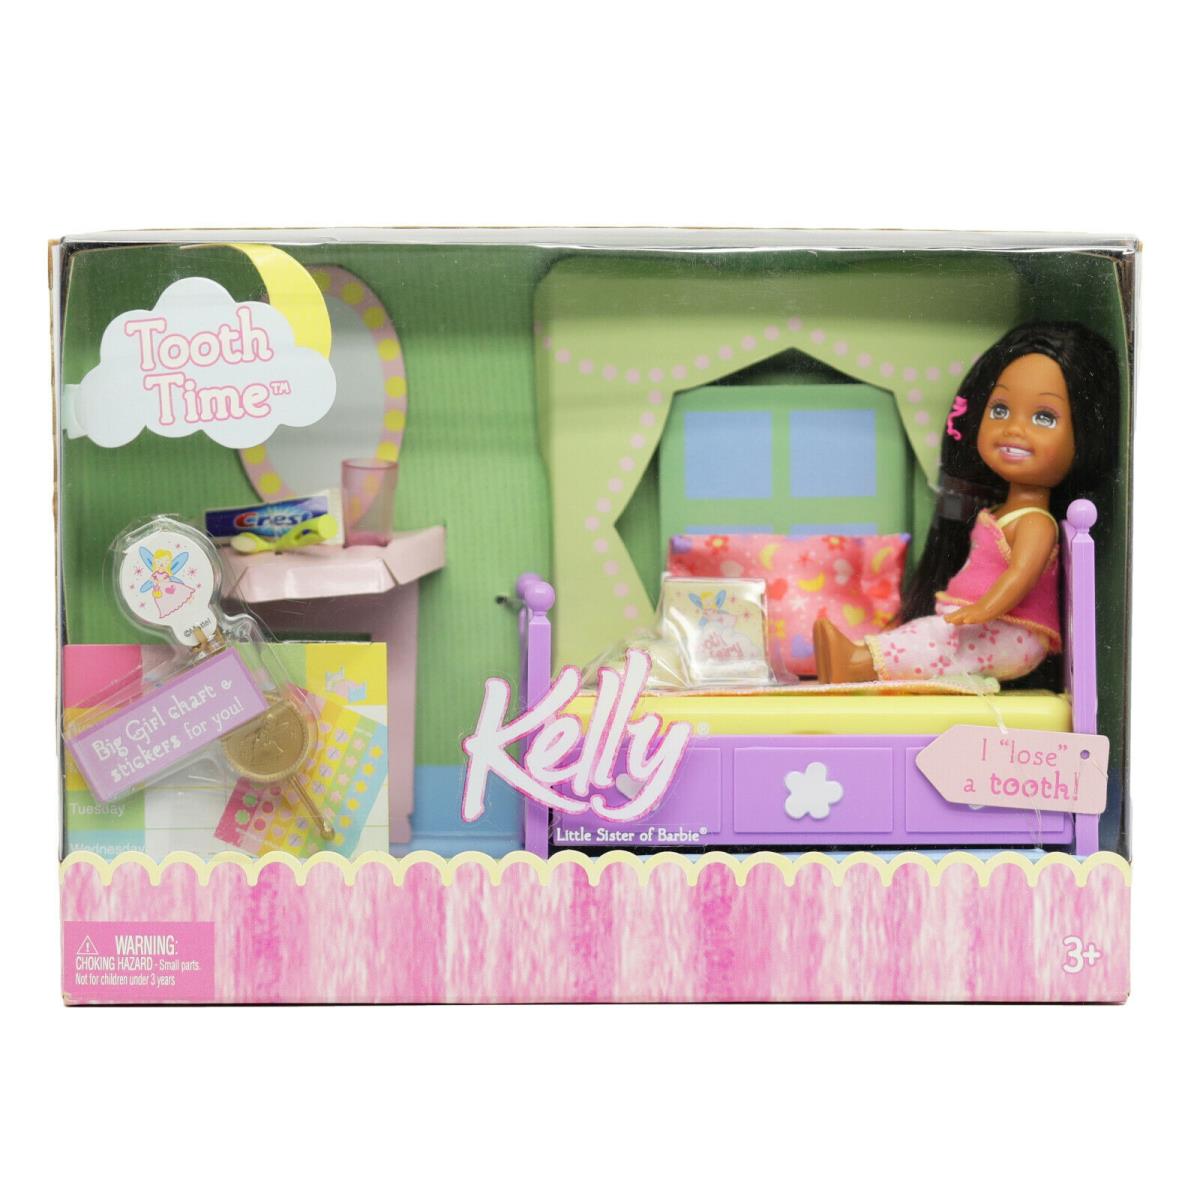 2004 Tooth Time Kelly Playset